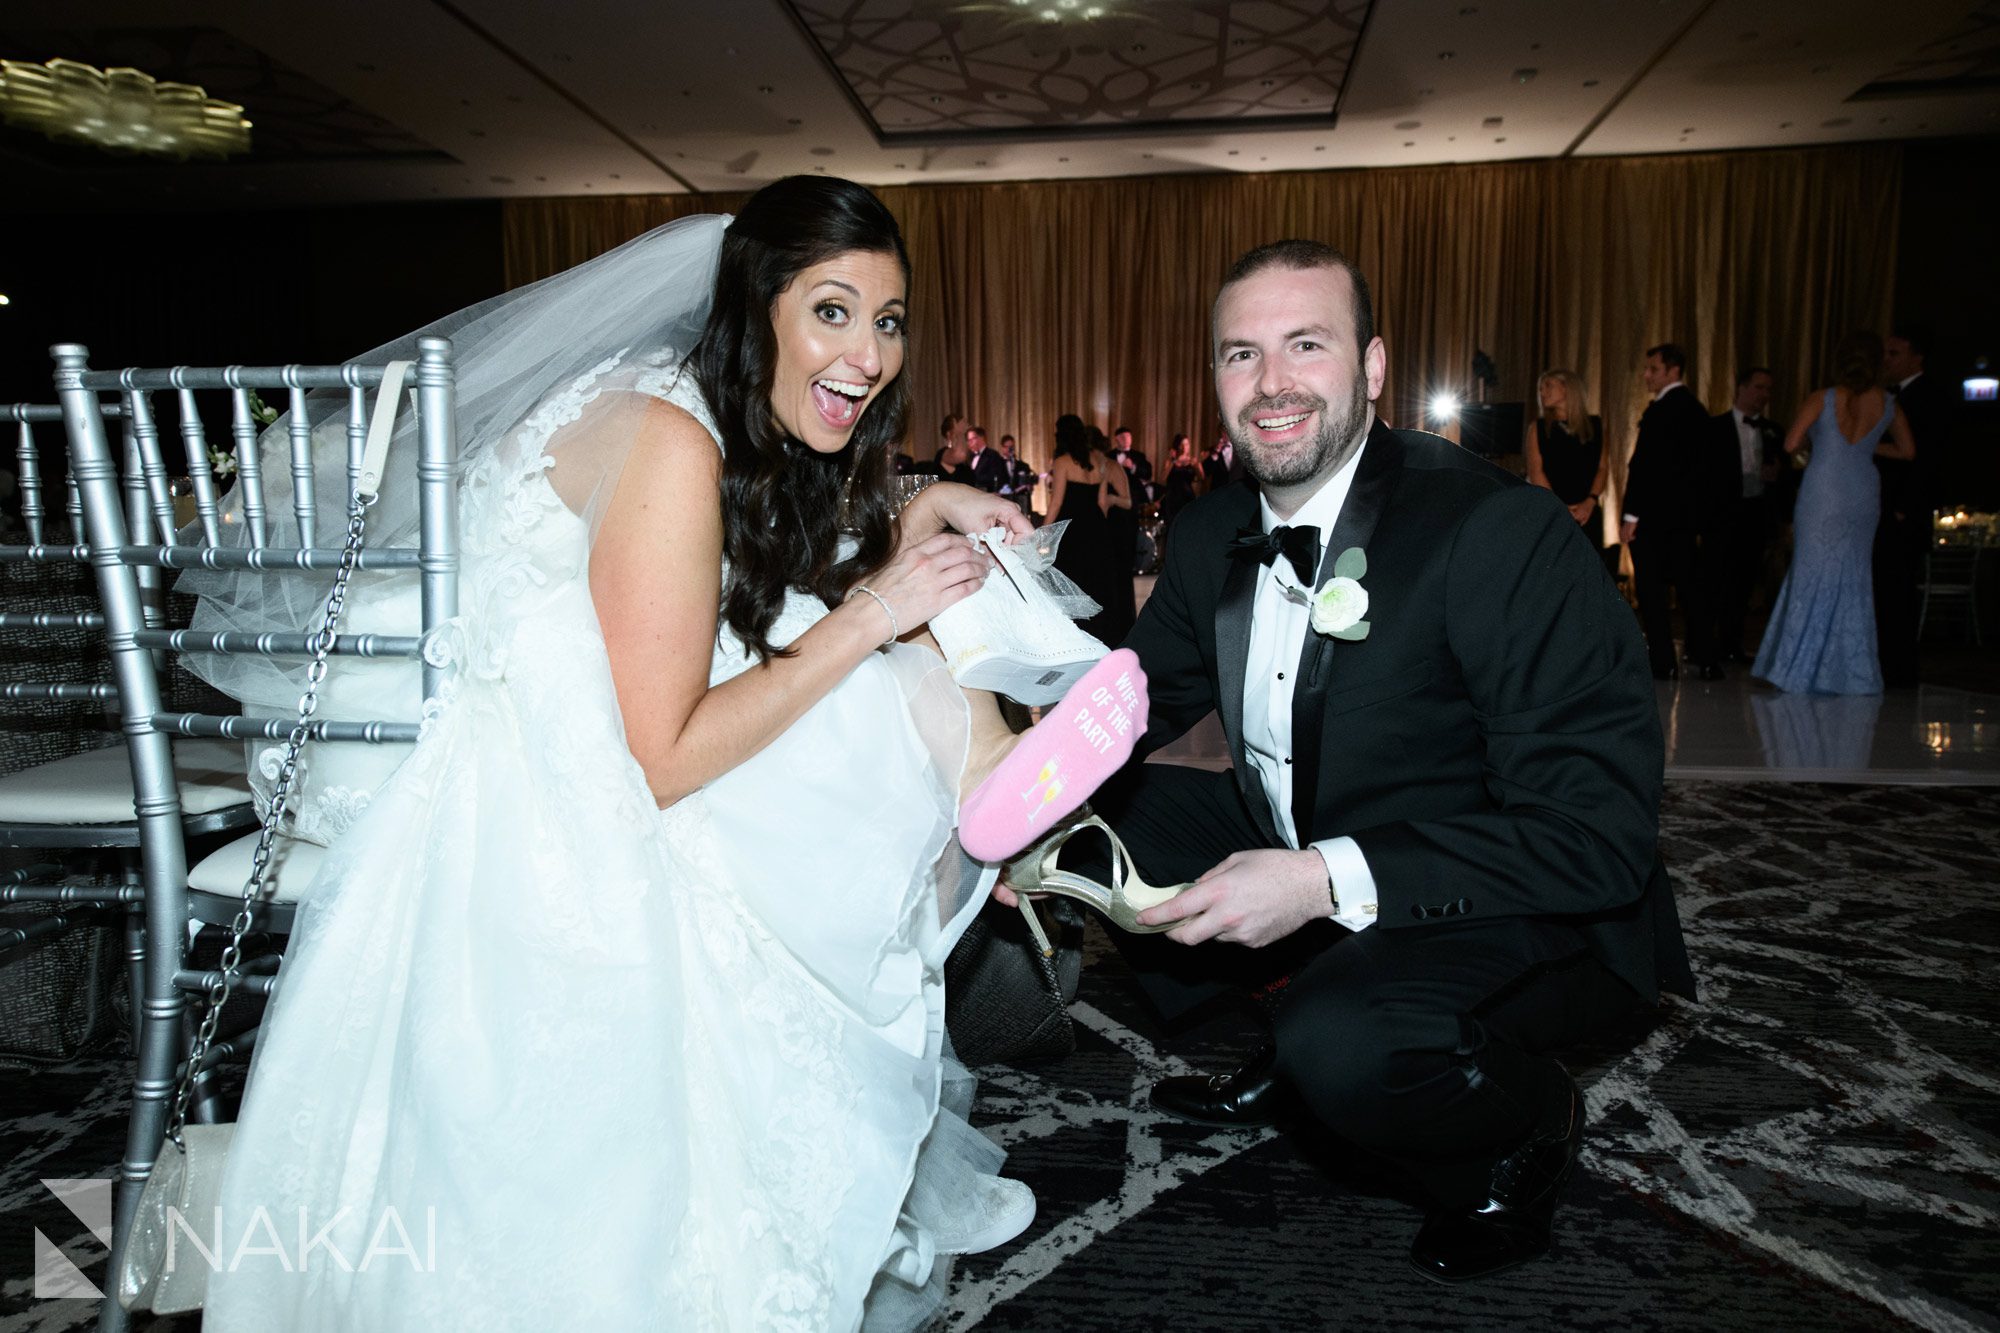 Loews downtown Chicago wedding reception pictures 